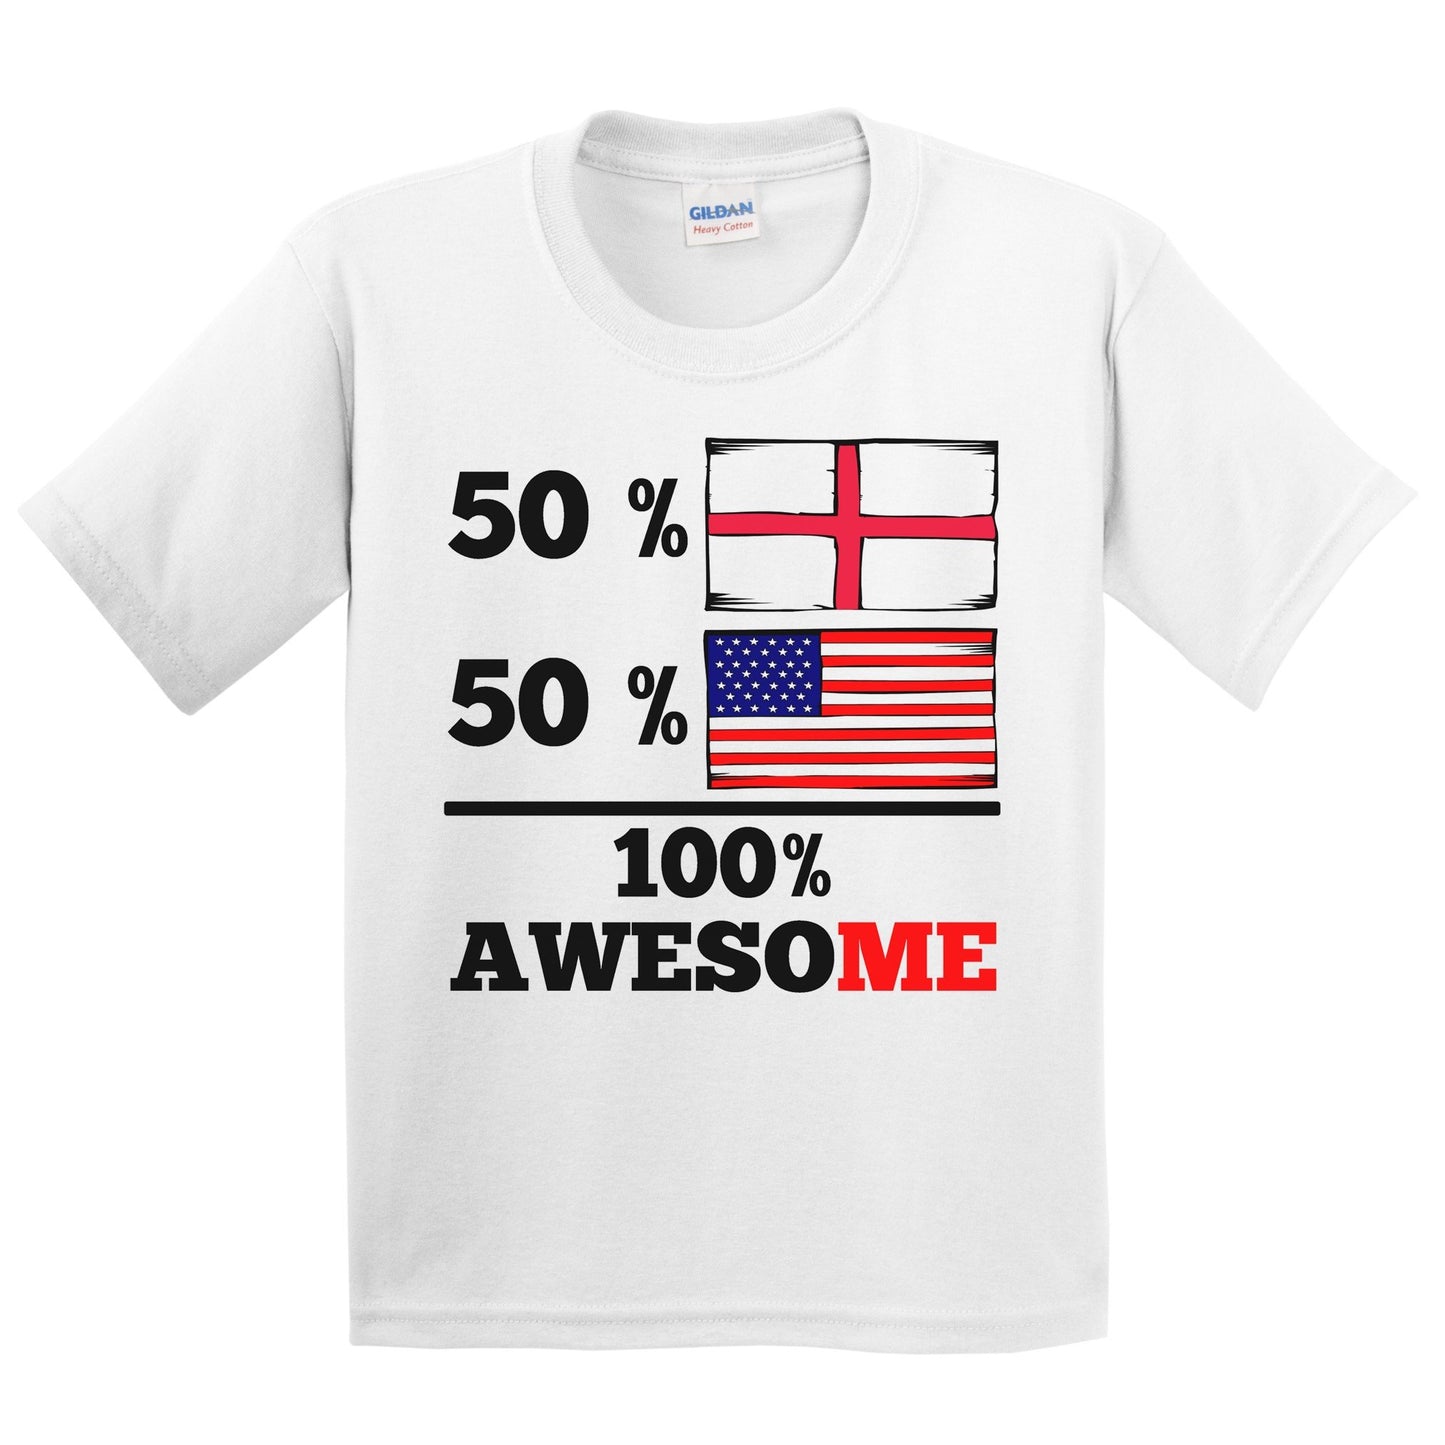 50% English 50% American 100% Awesome Kids Youth T-Shirt